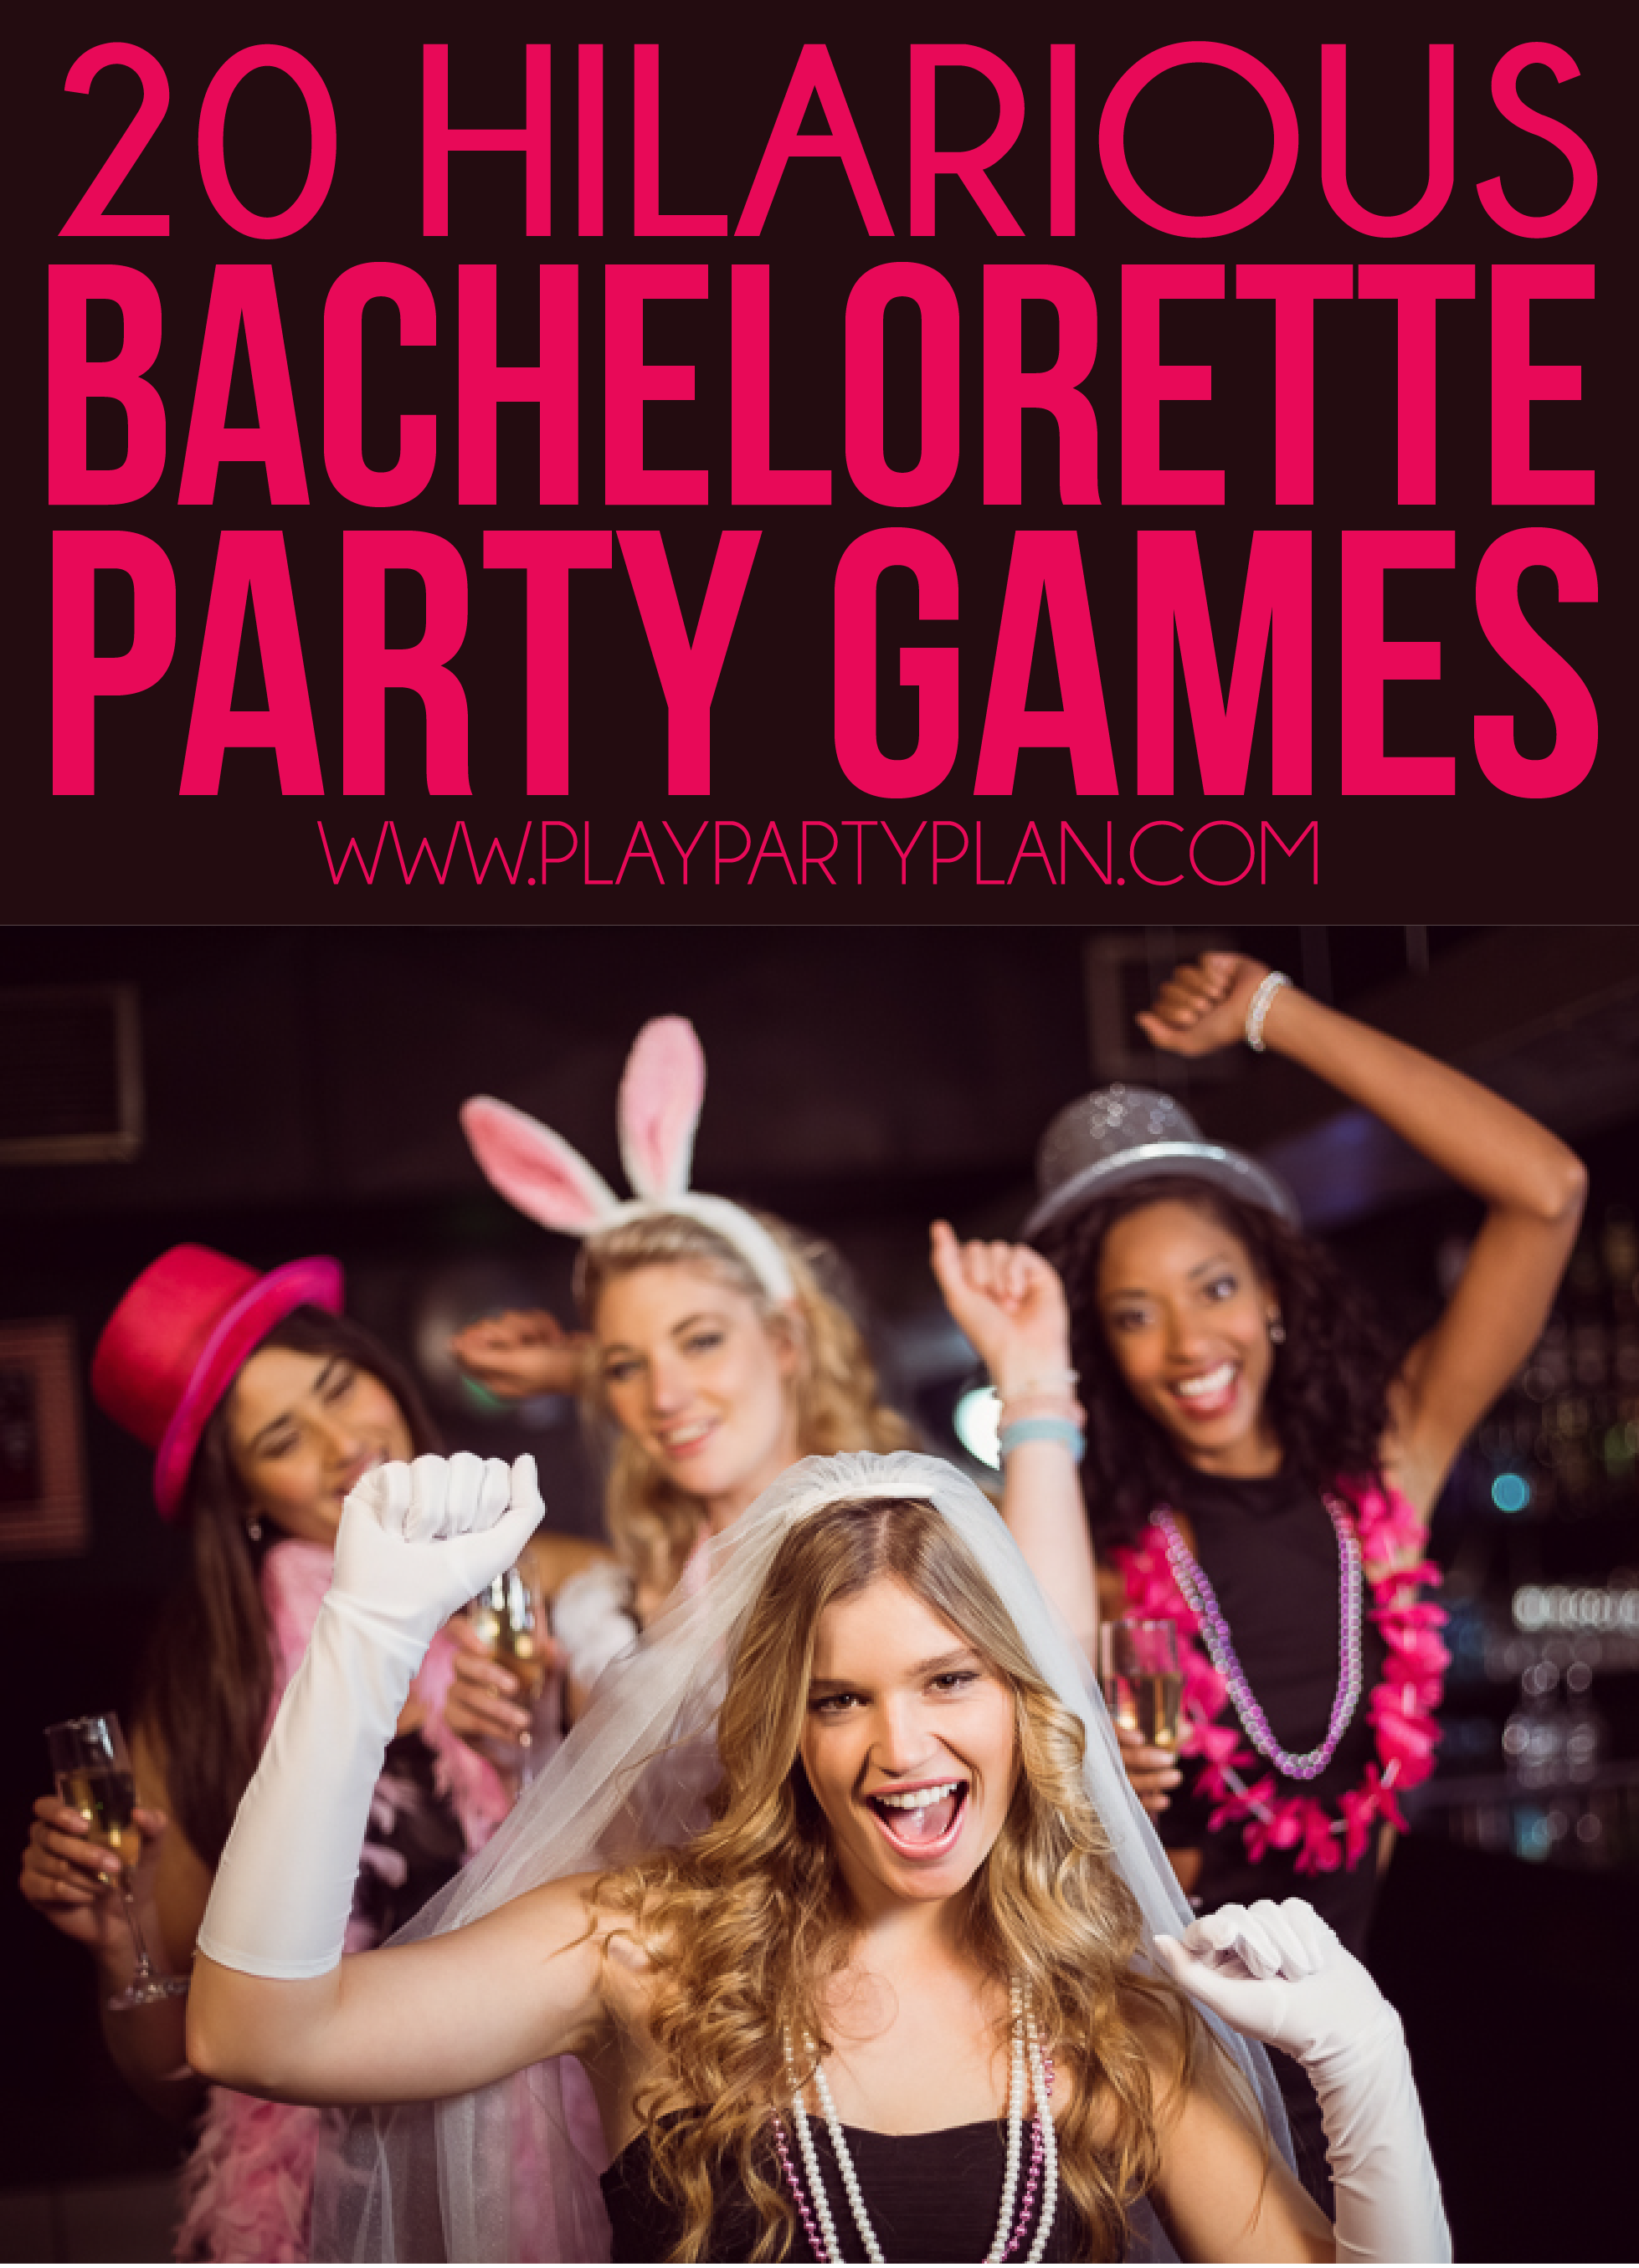 11 Bachelorette Party Games That Will Have Everyone Laughing - The